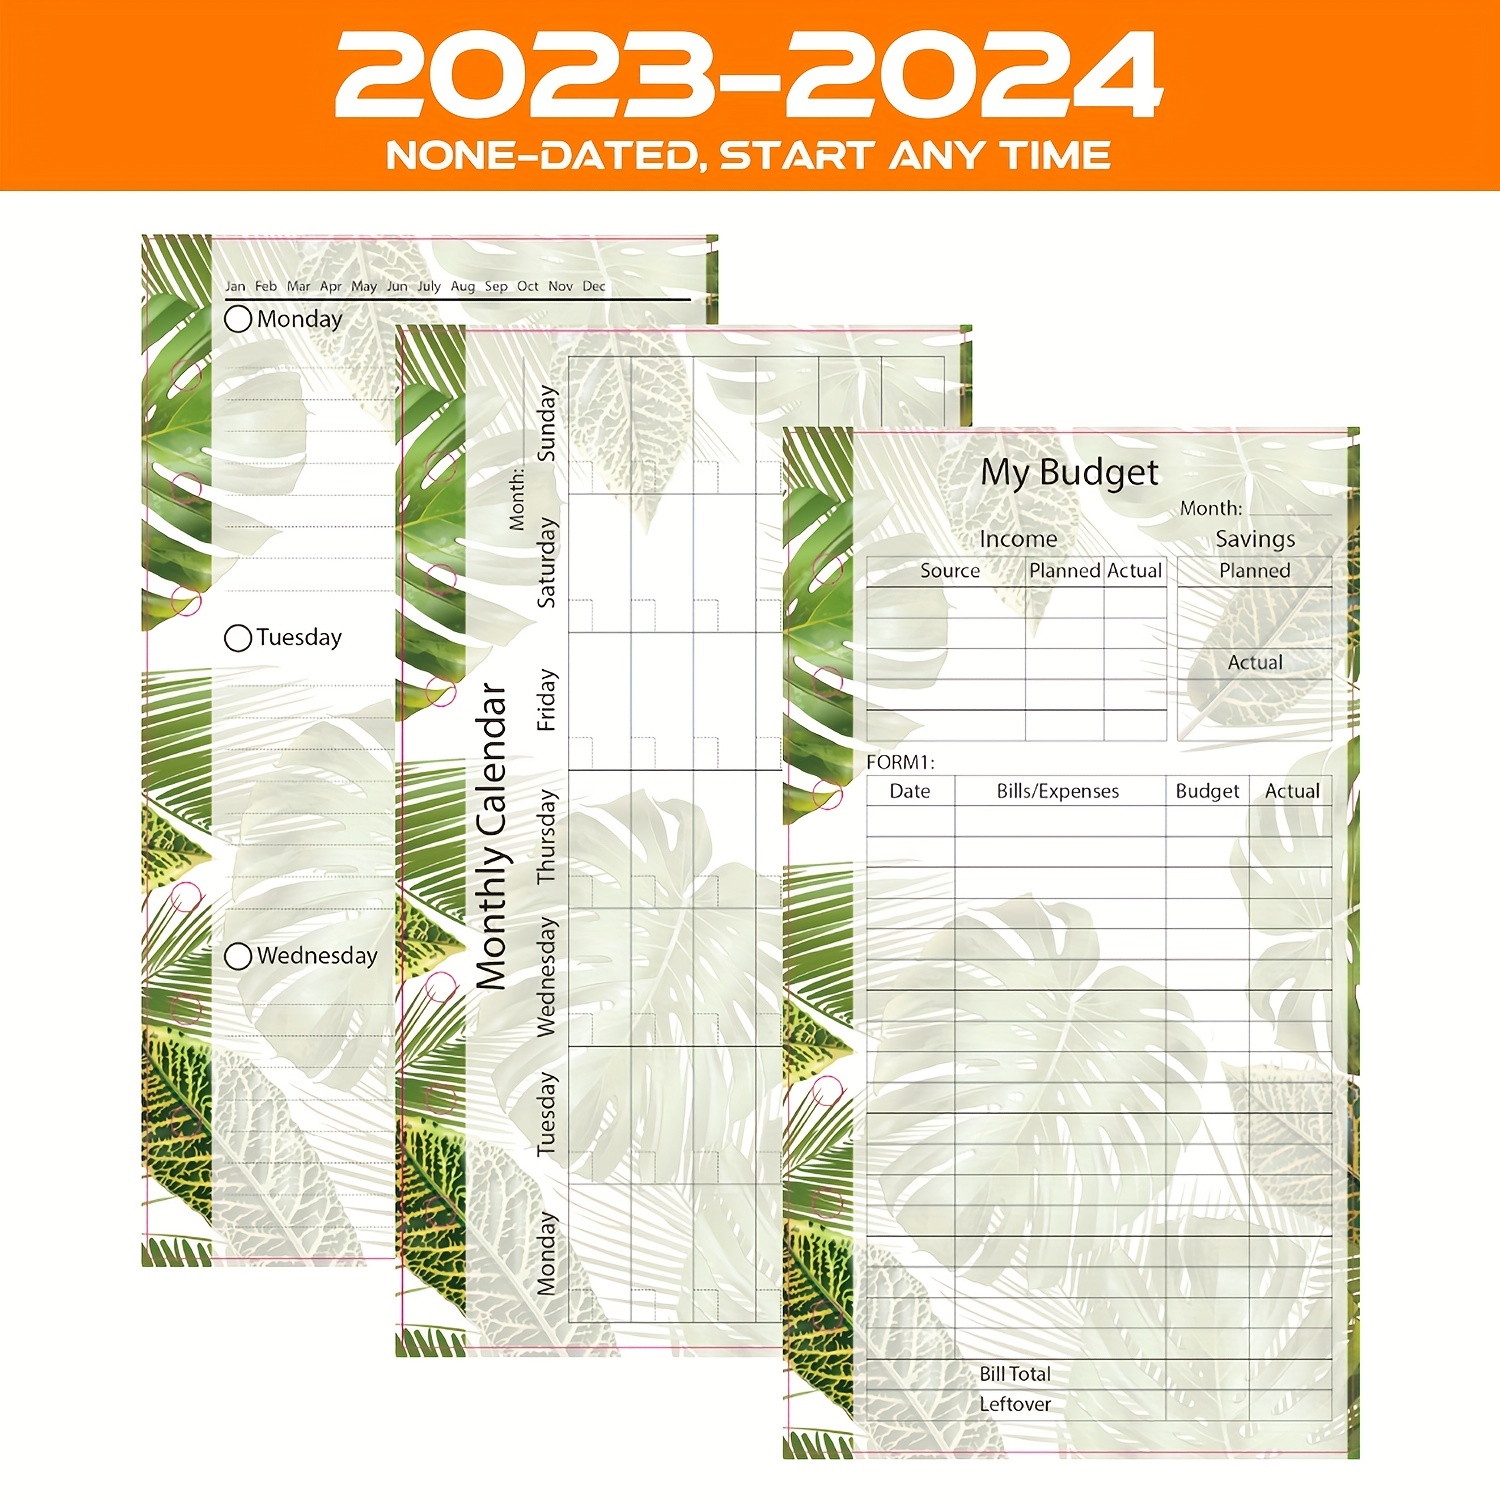 2024 Weekly & Monthly Planner & 6-Hole Budget System Refill, 6-3/4 x  3-3/4, Personal/Size 3 for Budget Binder Cover, Budgeting Cash Envelopes